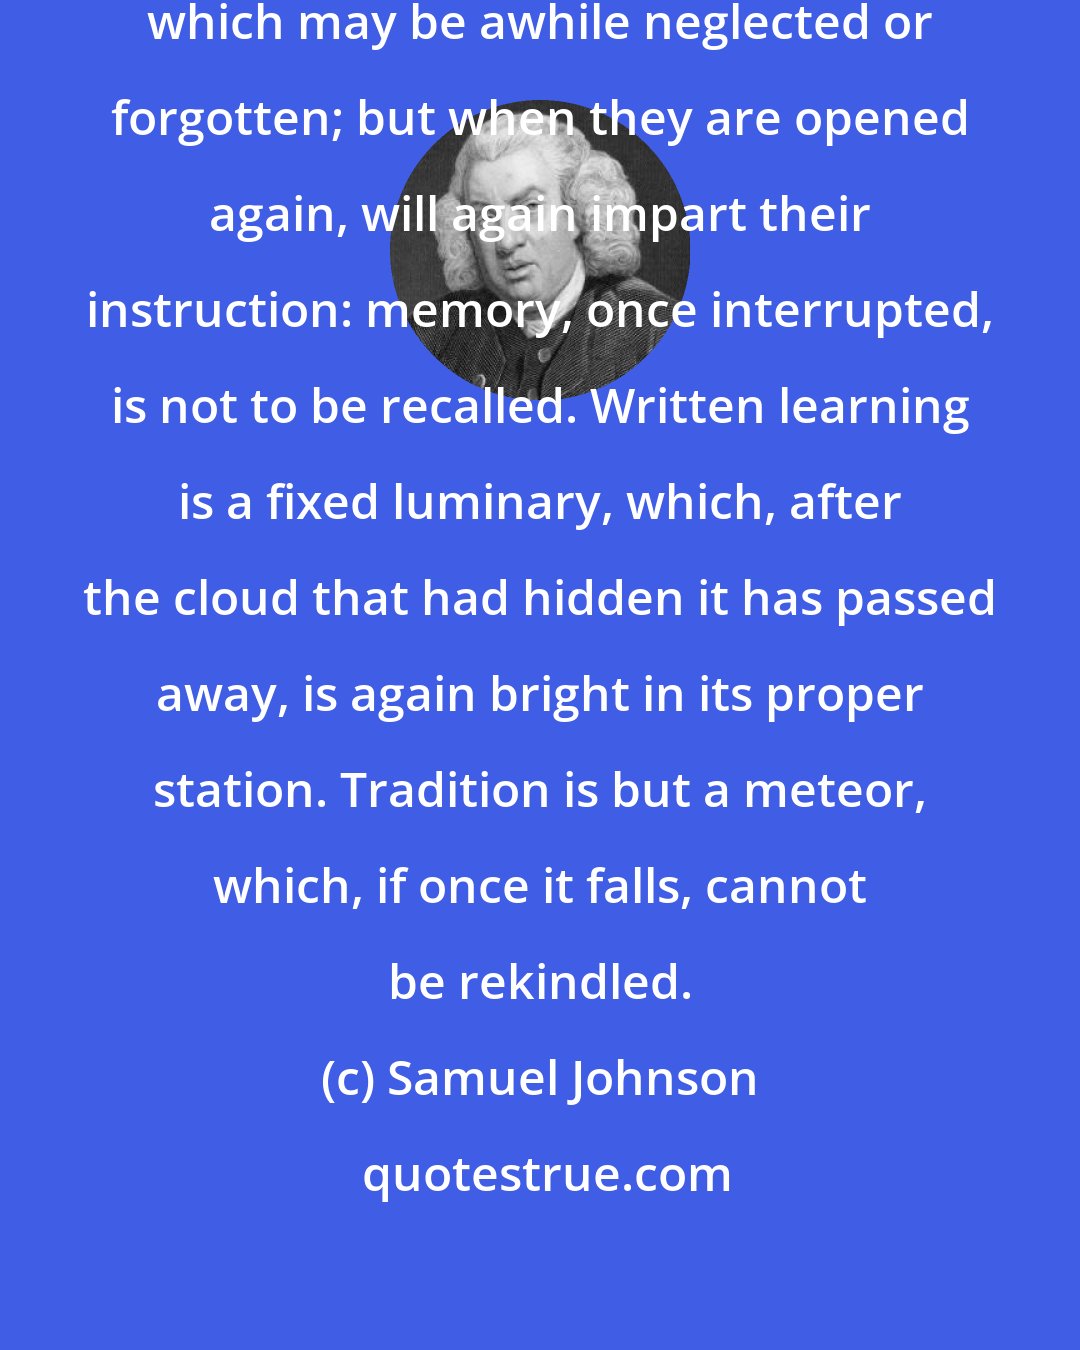 Samuel Johnson: Books are faithful repositories, which may be awhile neglected or forgotten; but when they are opened again, will again impart their instruction: memory, once interrupted, is not to be recalled. Written learning is a fixed luminary, which, after the cloud that had hidden it has passed away, is again bright in its proper station. Tradition is but a meteor, which, if once it falls, cannot be rekindled.